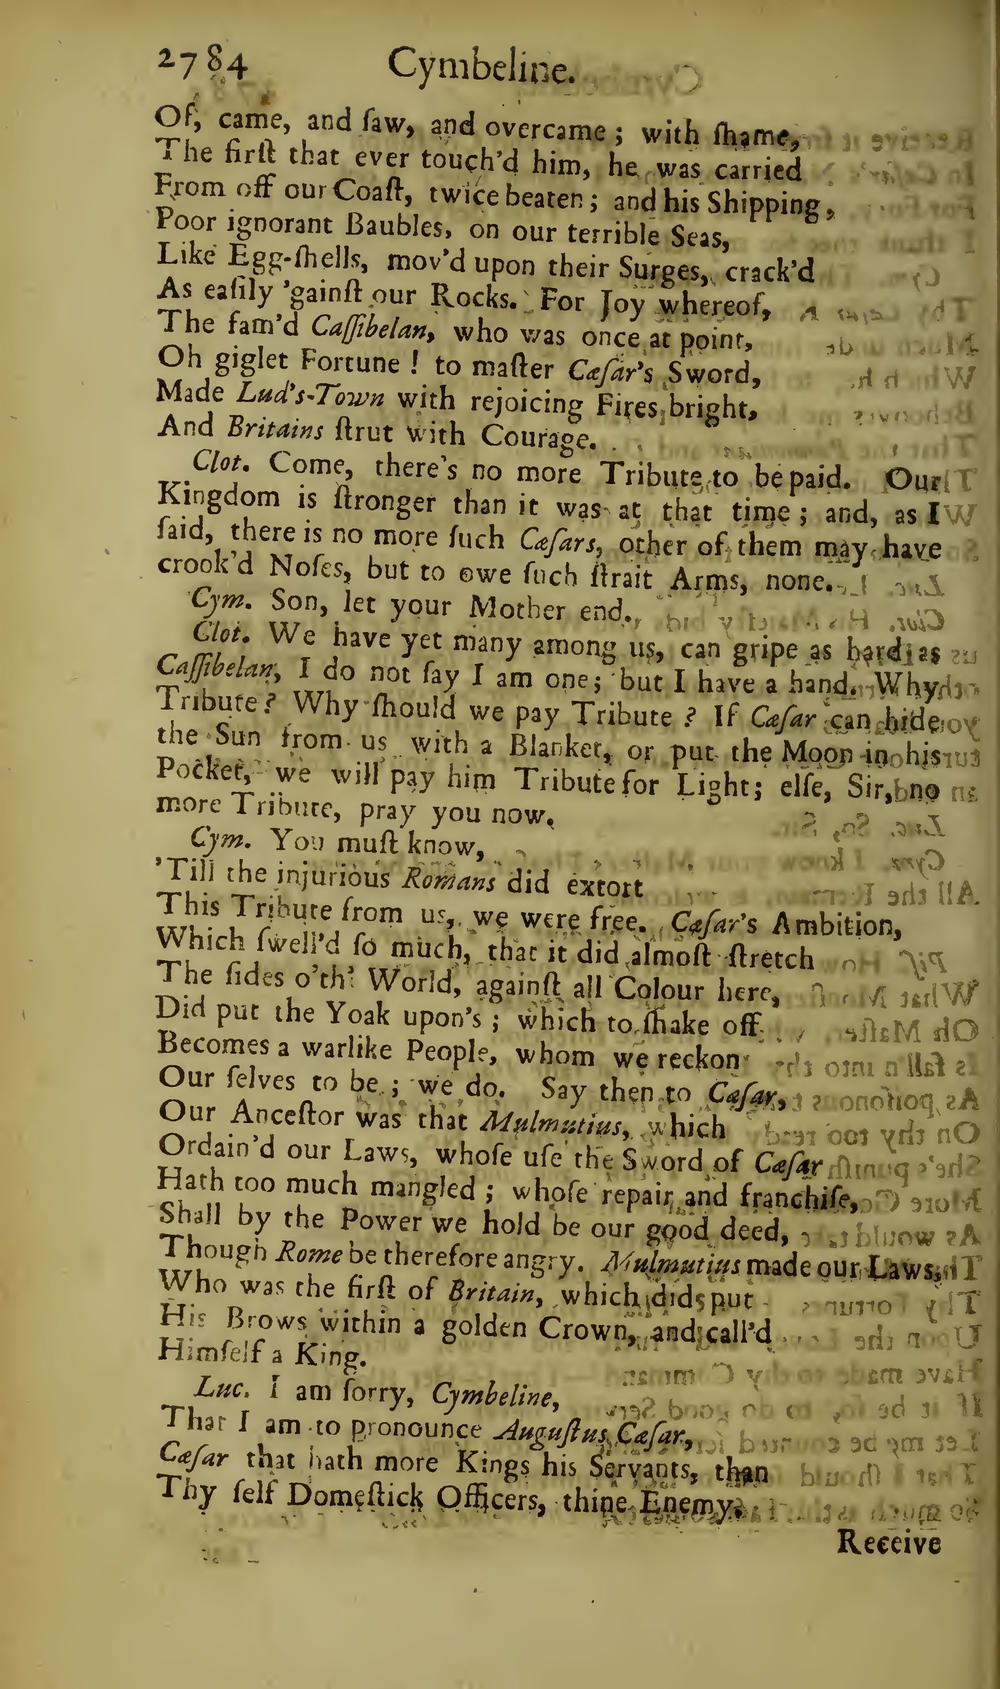 Image of page 138